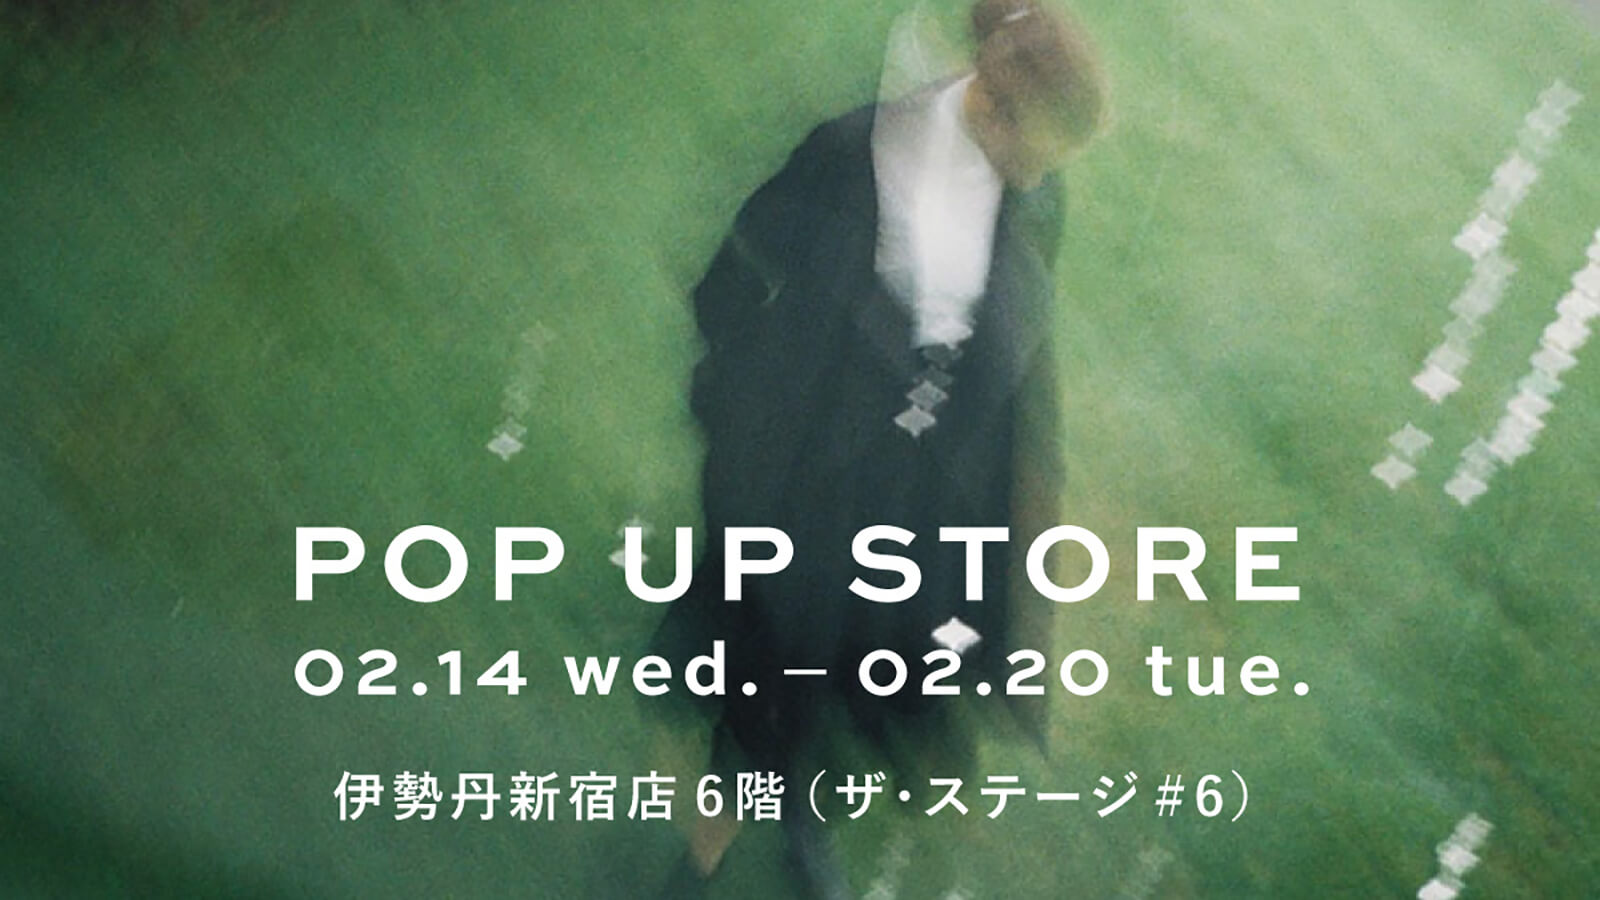 POP UP STORE 2024/02/14 wed. - 2024/02/20 wed. 伊勢丹新宿店6階 （ザ・ステージ#6） | MATO by MARLMARL